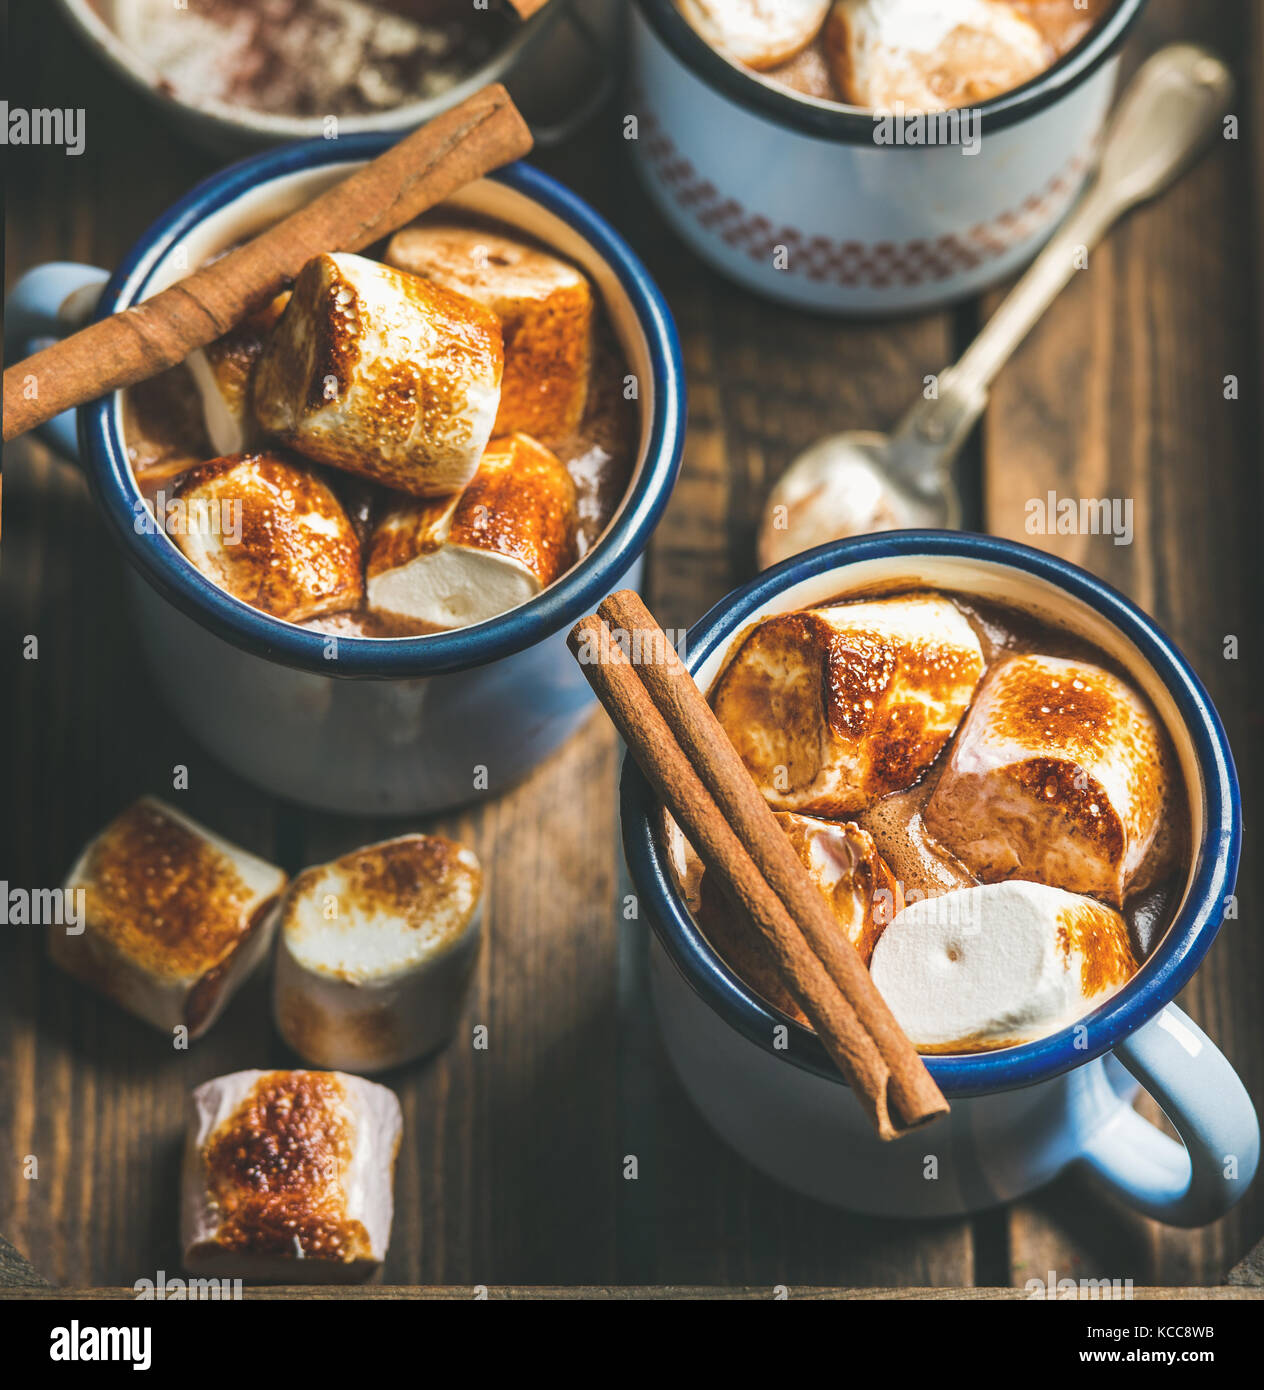 Hot chocolate with cinnamon and roasted marshmallows, square crop Stock Photo